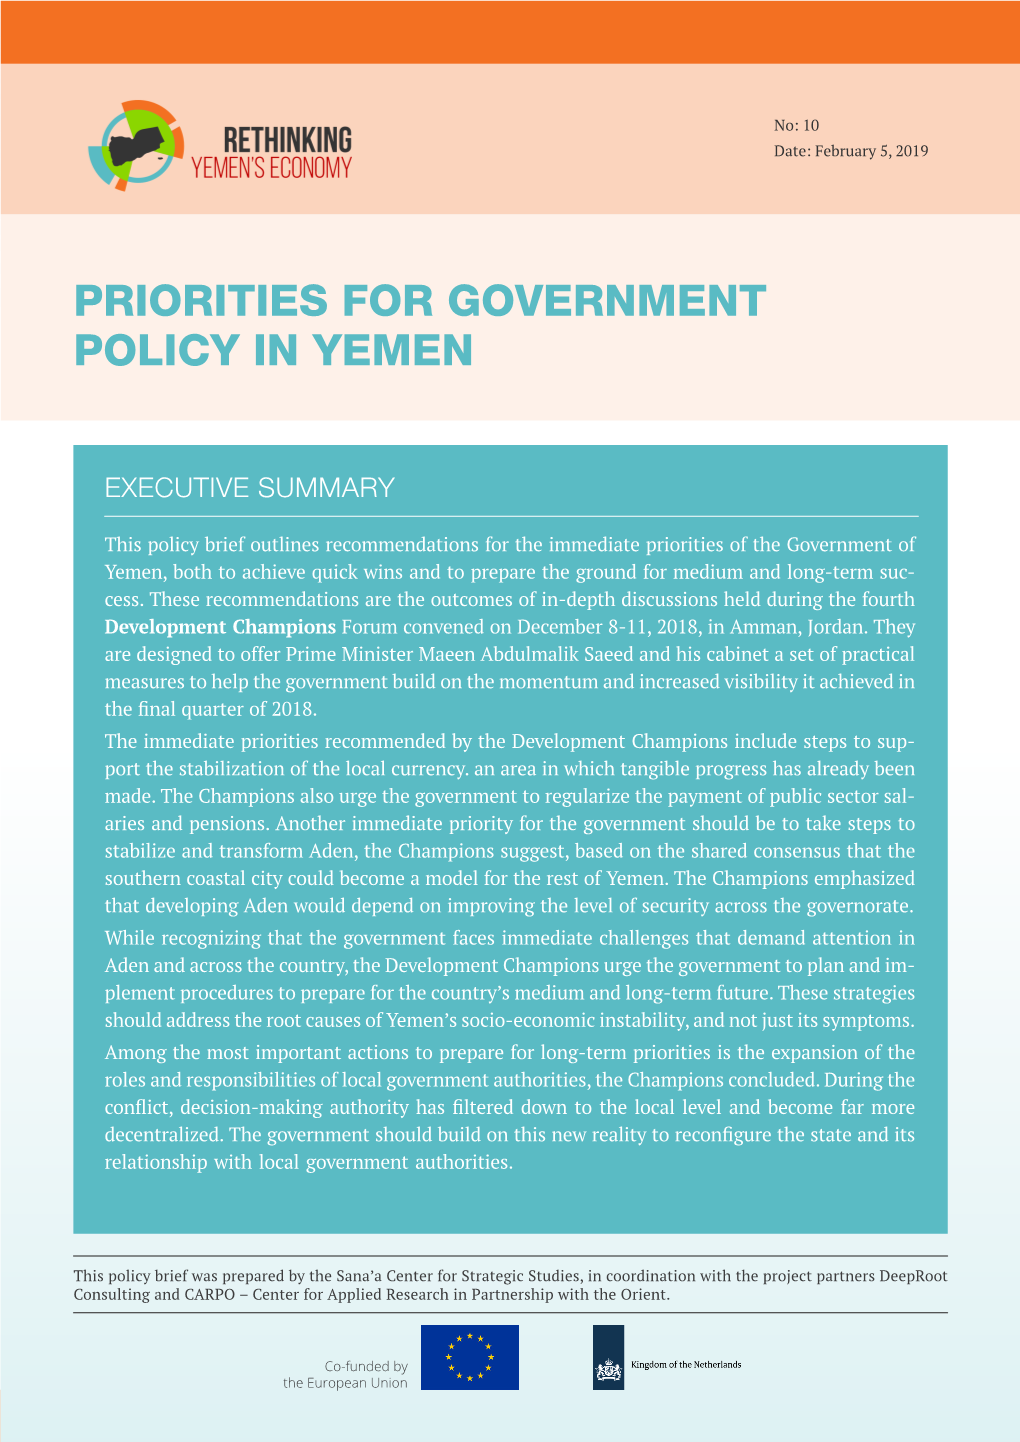 Priorities for Government Policy in Yemen